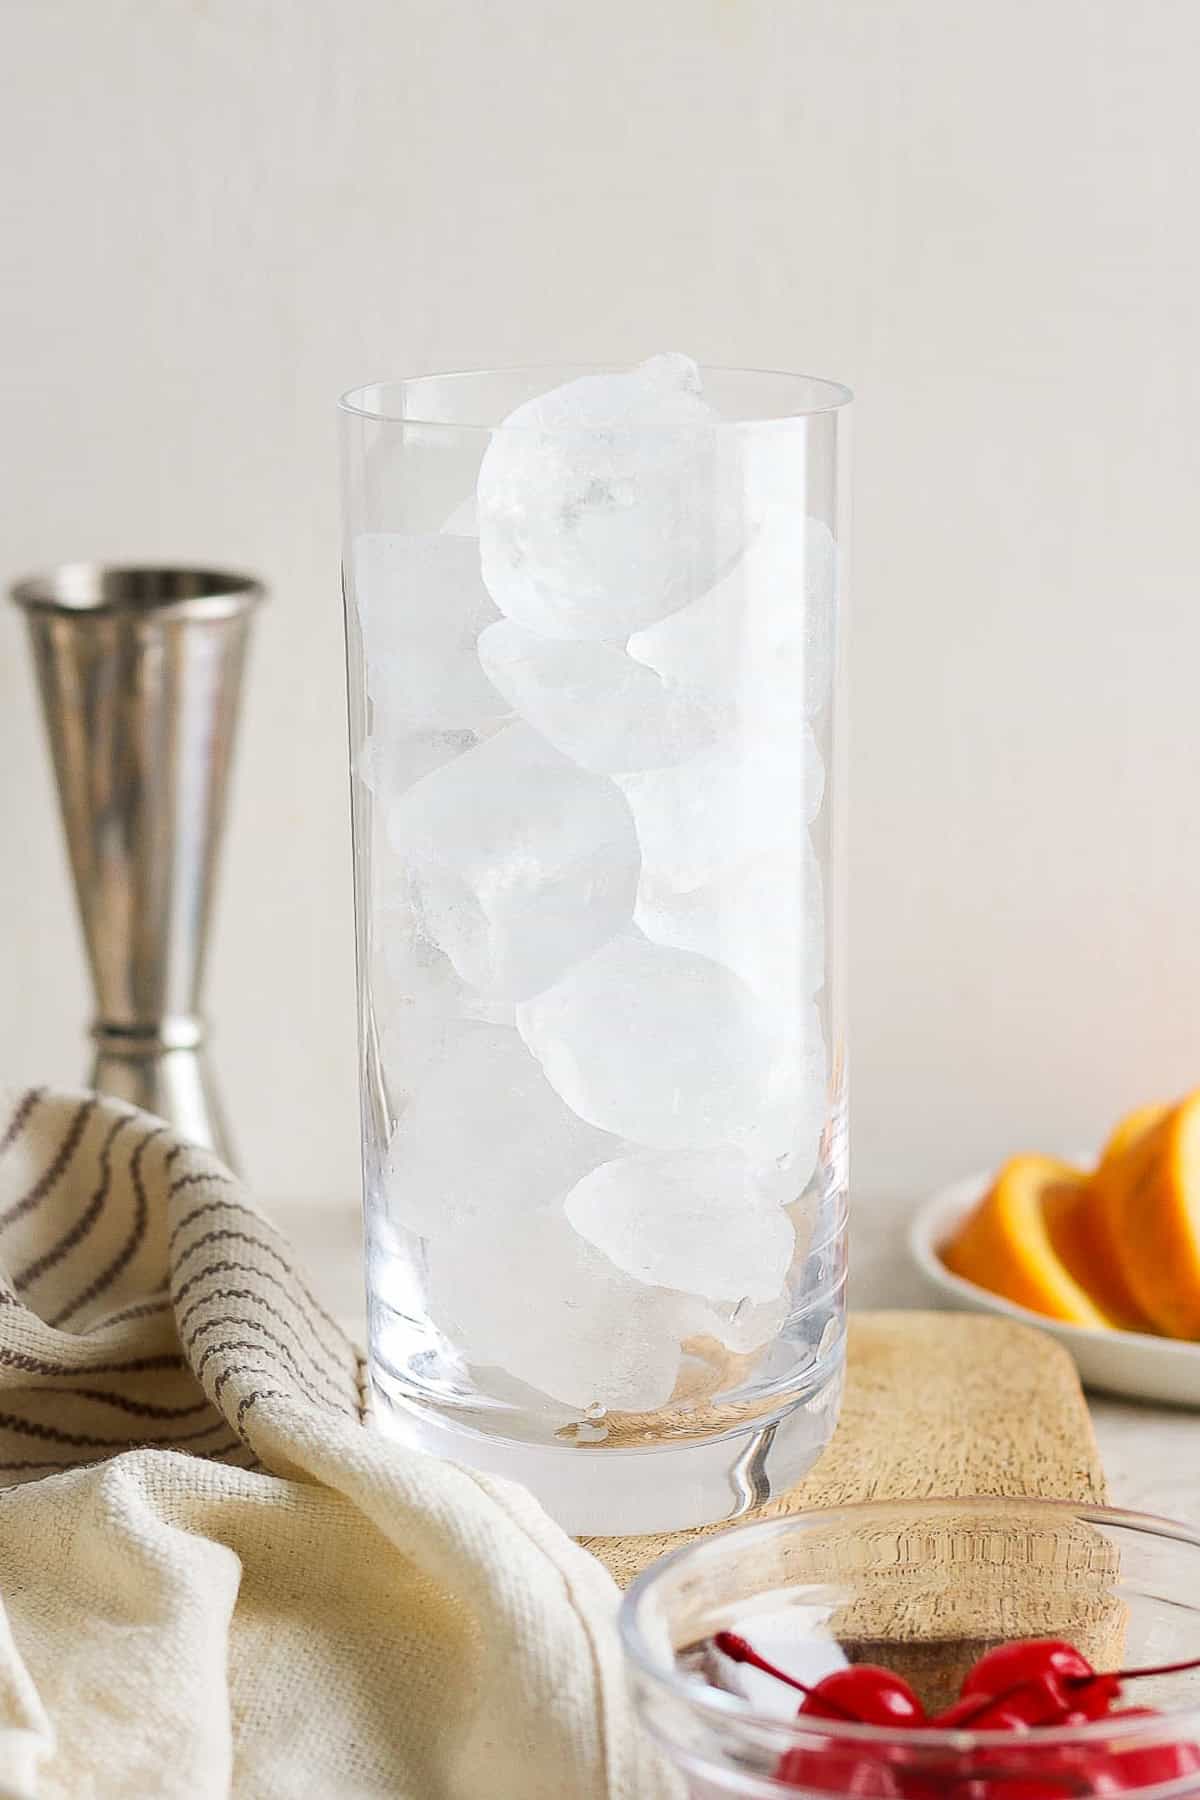 A highball glass filled with ice.